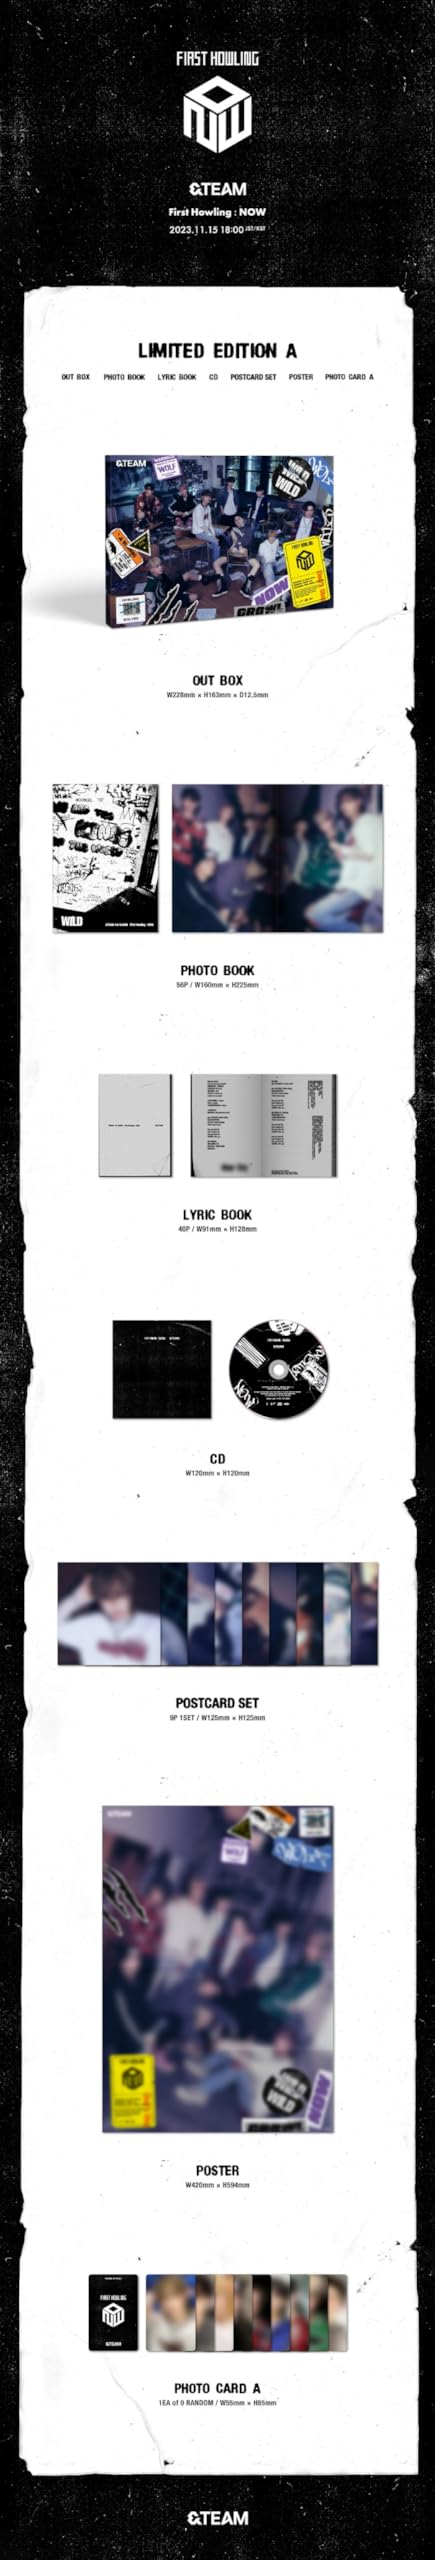 [CD] First Howling: NOW Type A w/PHOTOBOOK+PHOTOCARD A First Edition POCS-39044_2